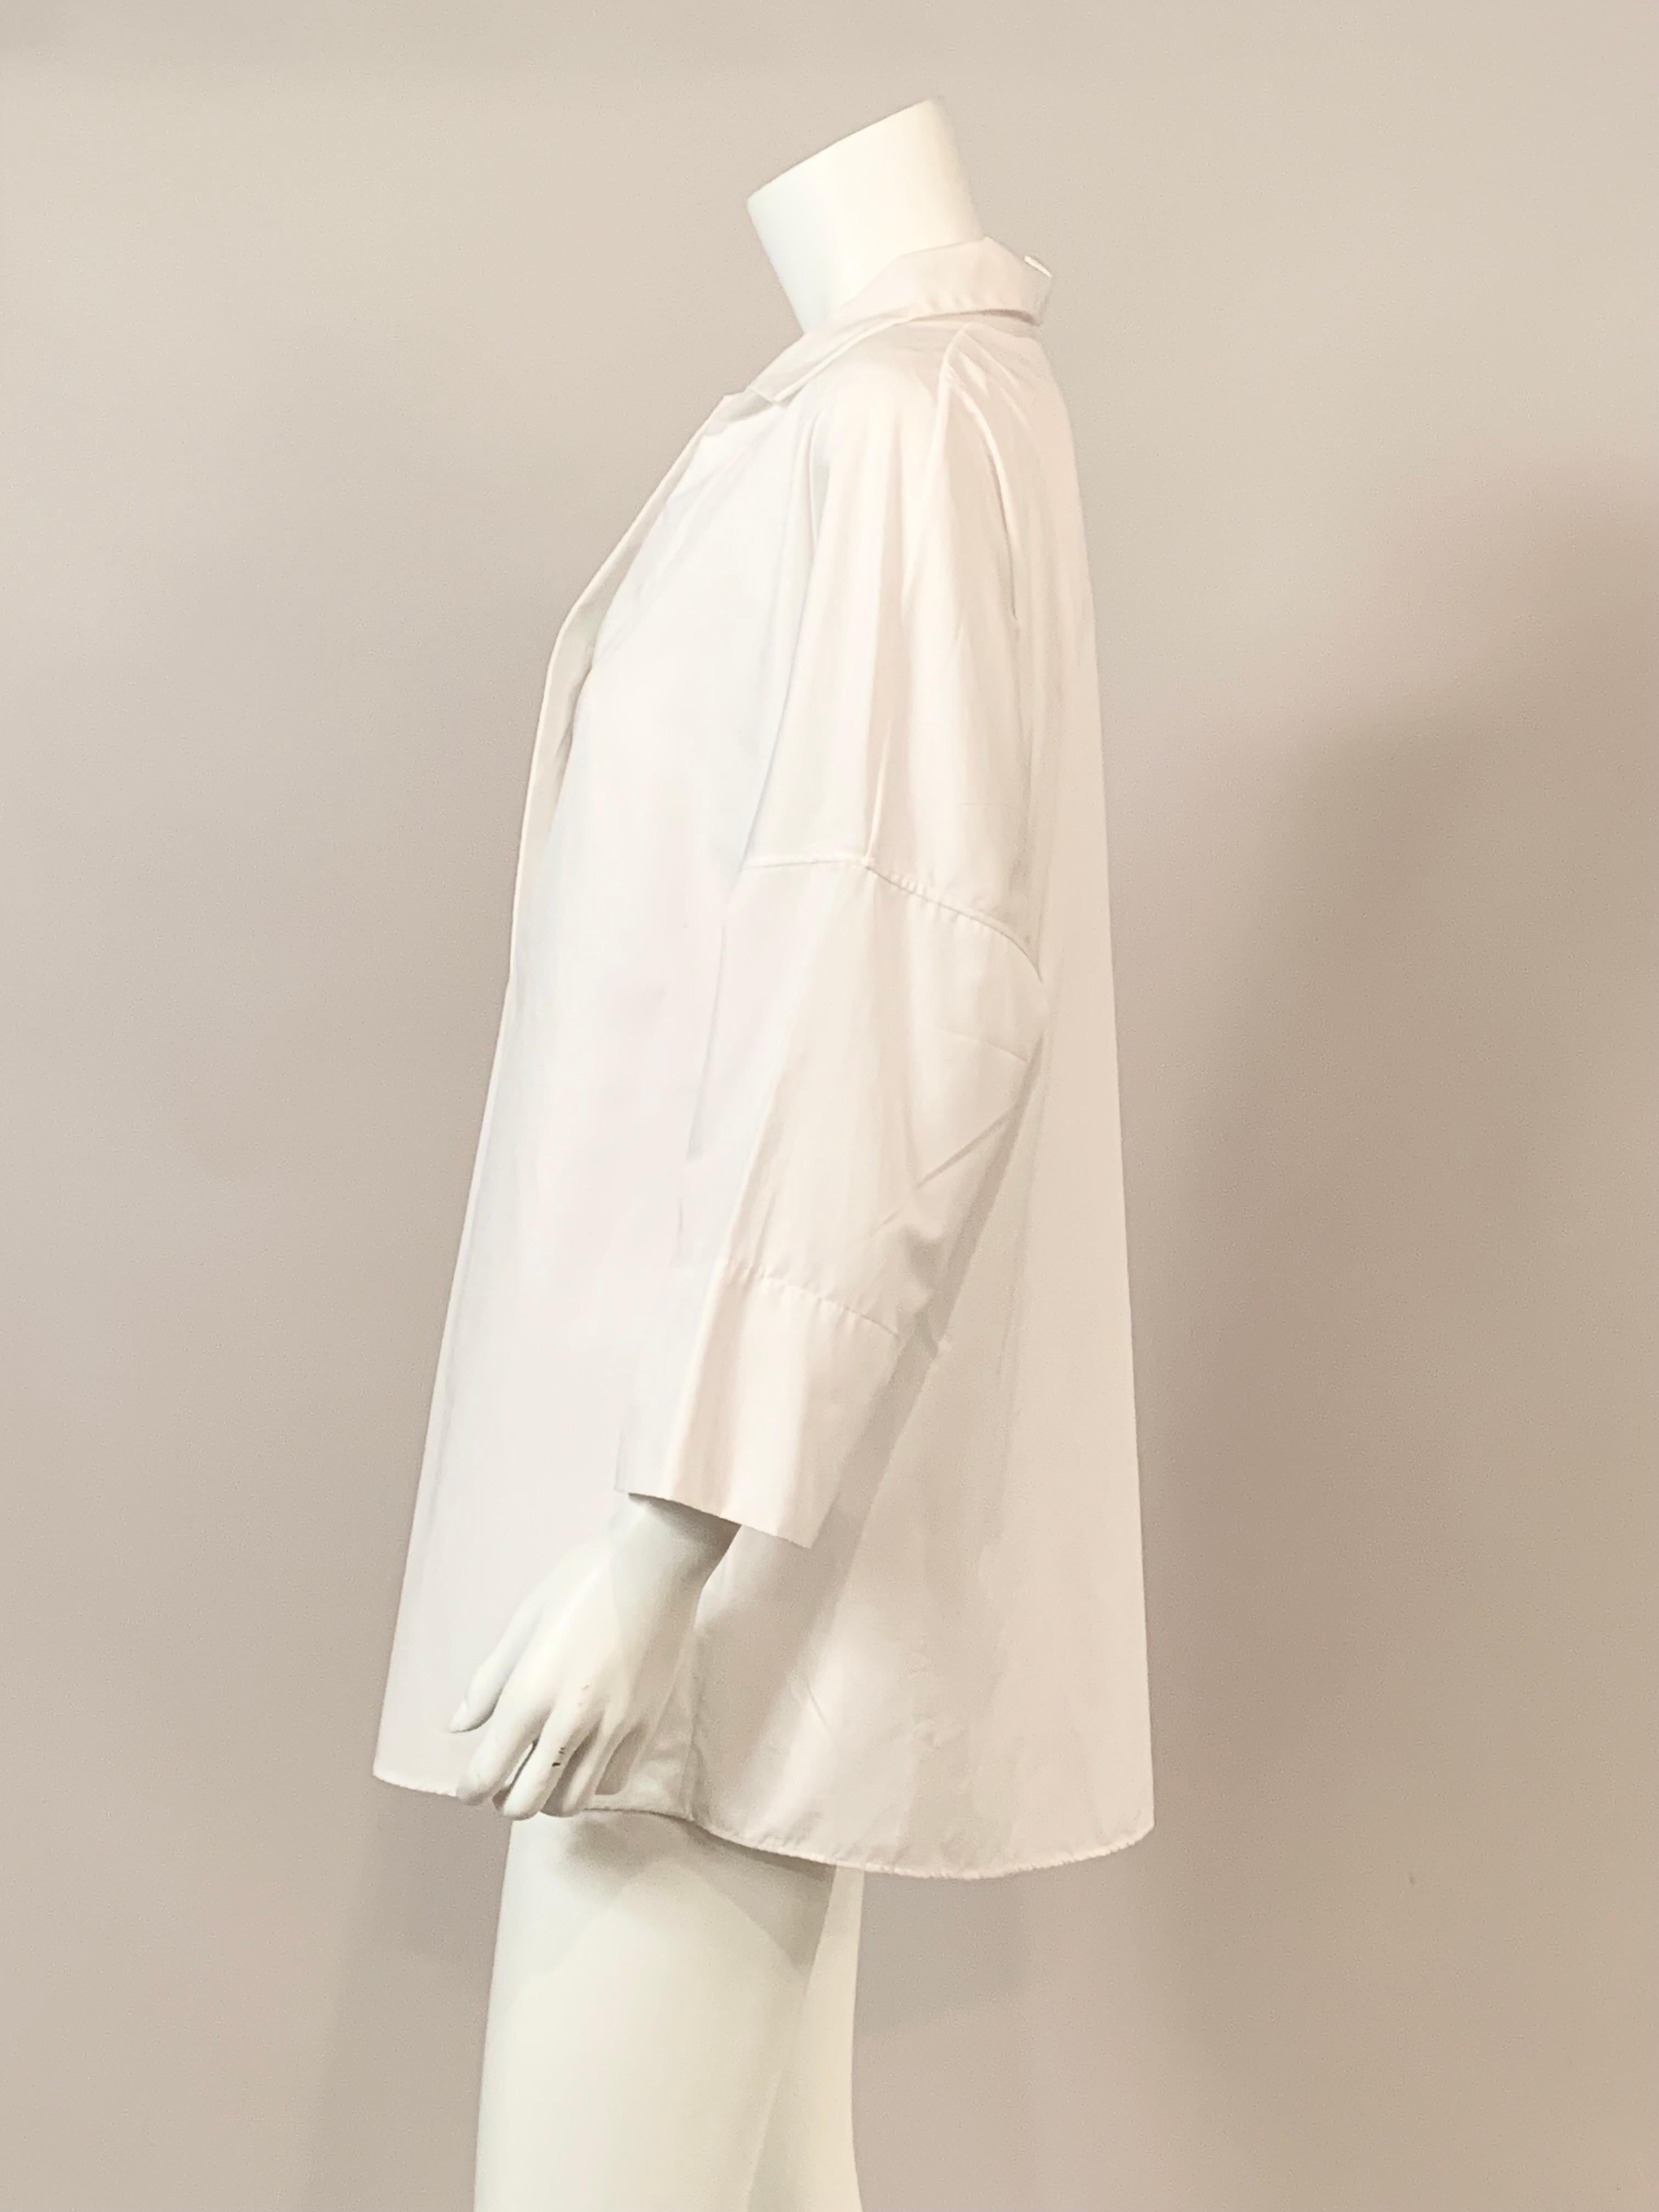 Akris White Cotton Tunic with Original Tags  Never Worn In New Condition For Sale In New Hope, PA